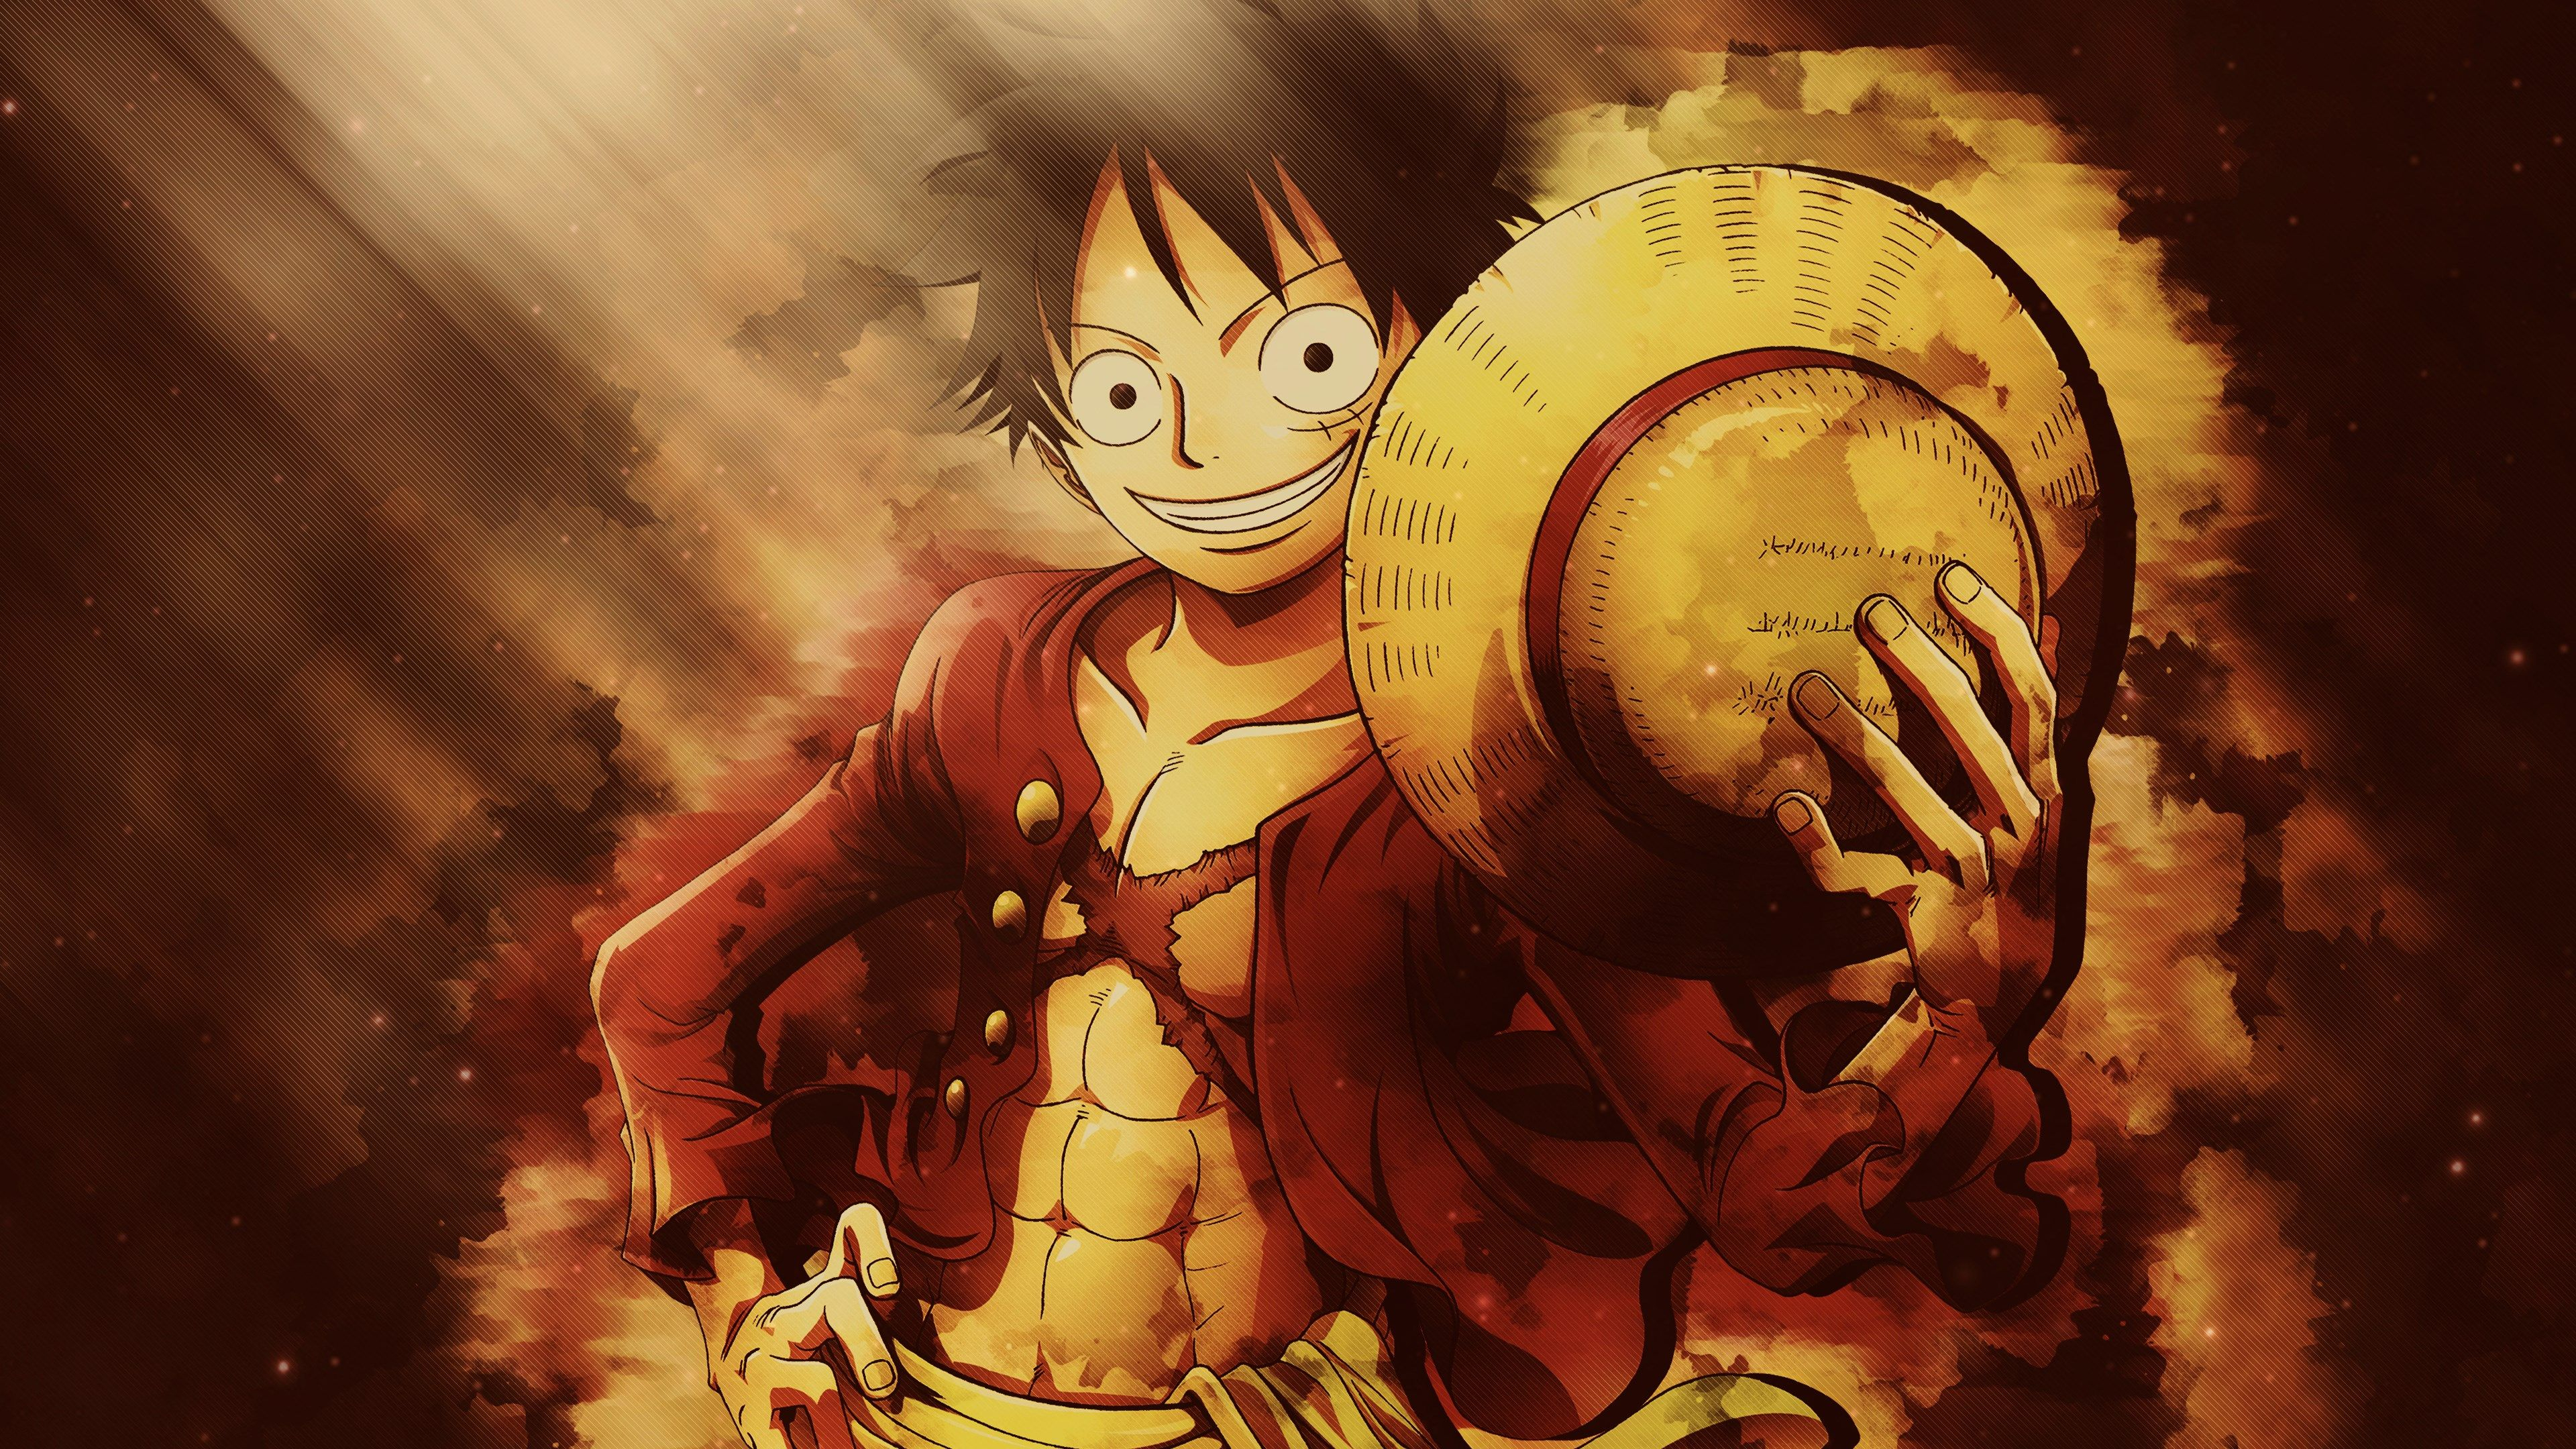 3840x2160 one piece free for desktop | Monkey d. luffy wallpapers, Anime, Anime wallpaper